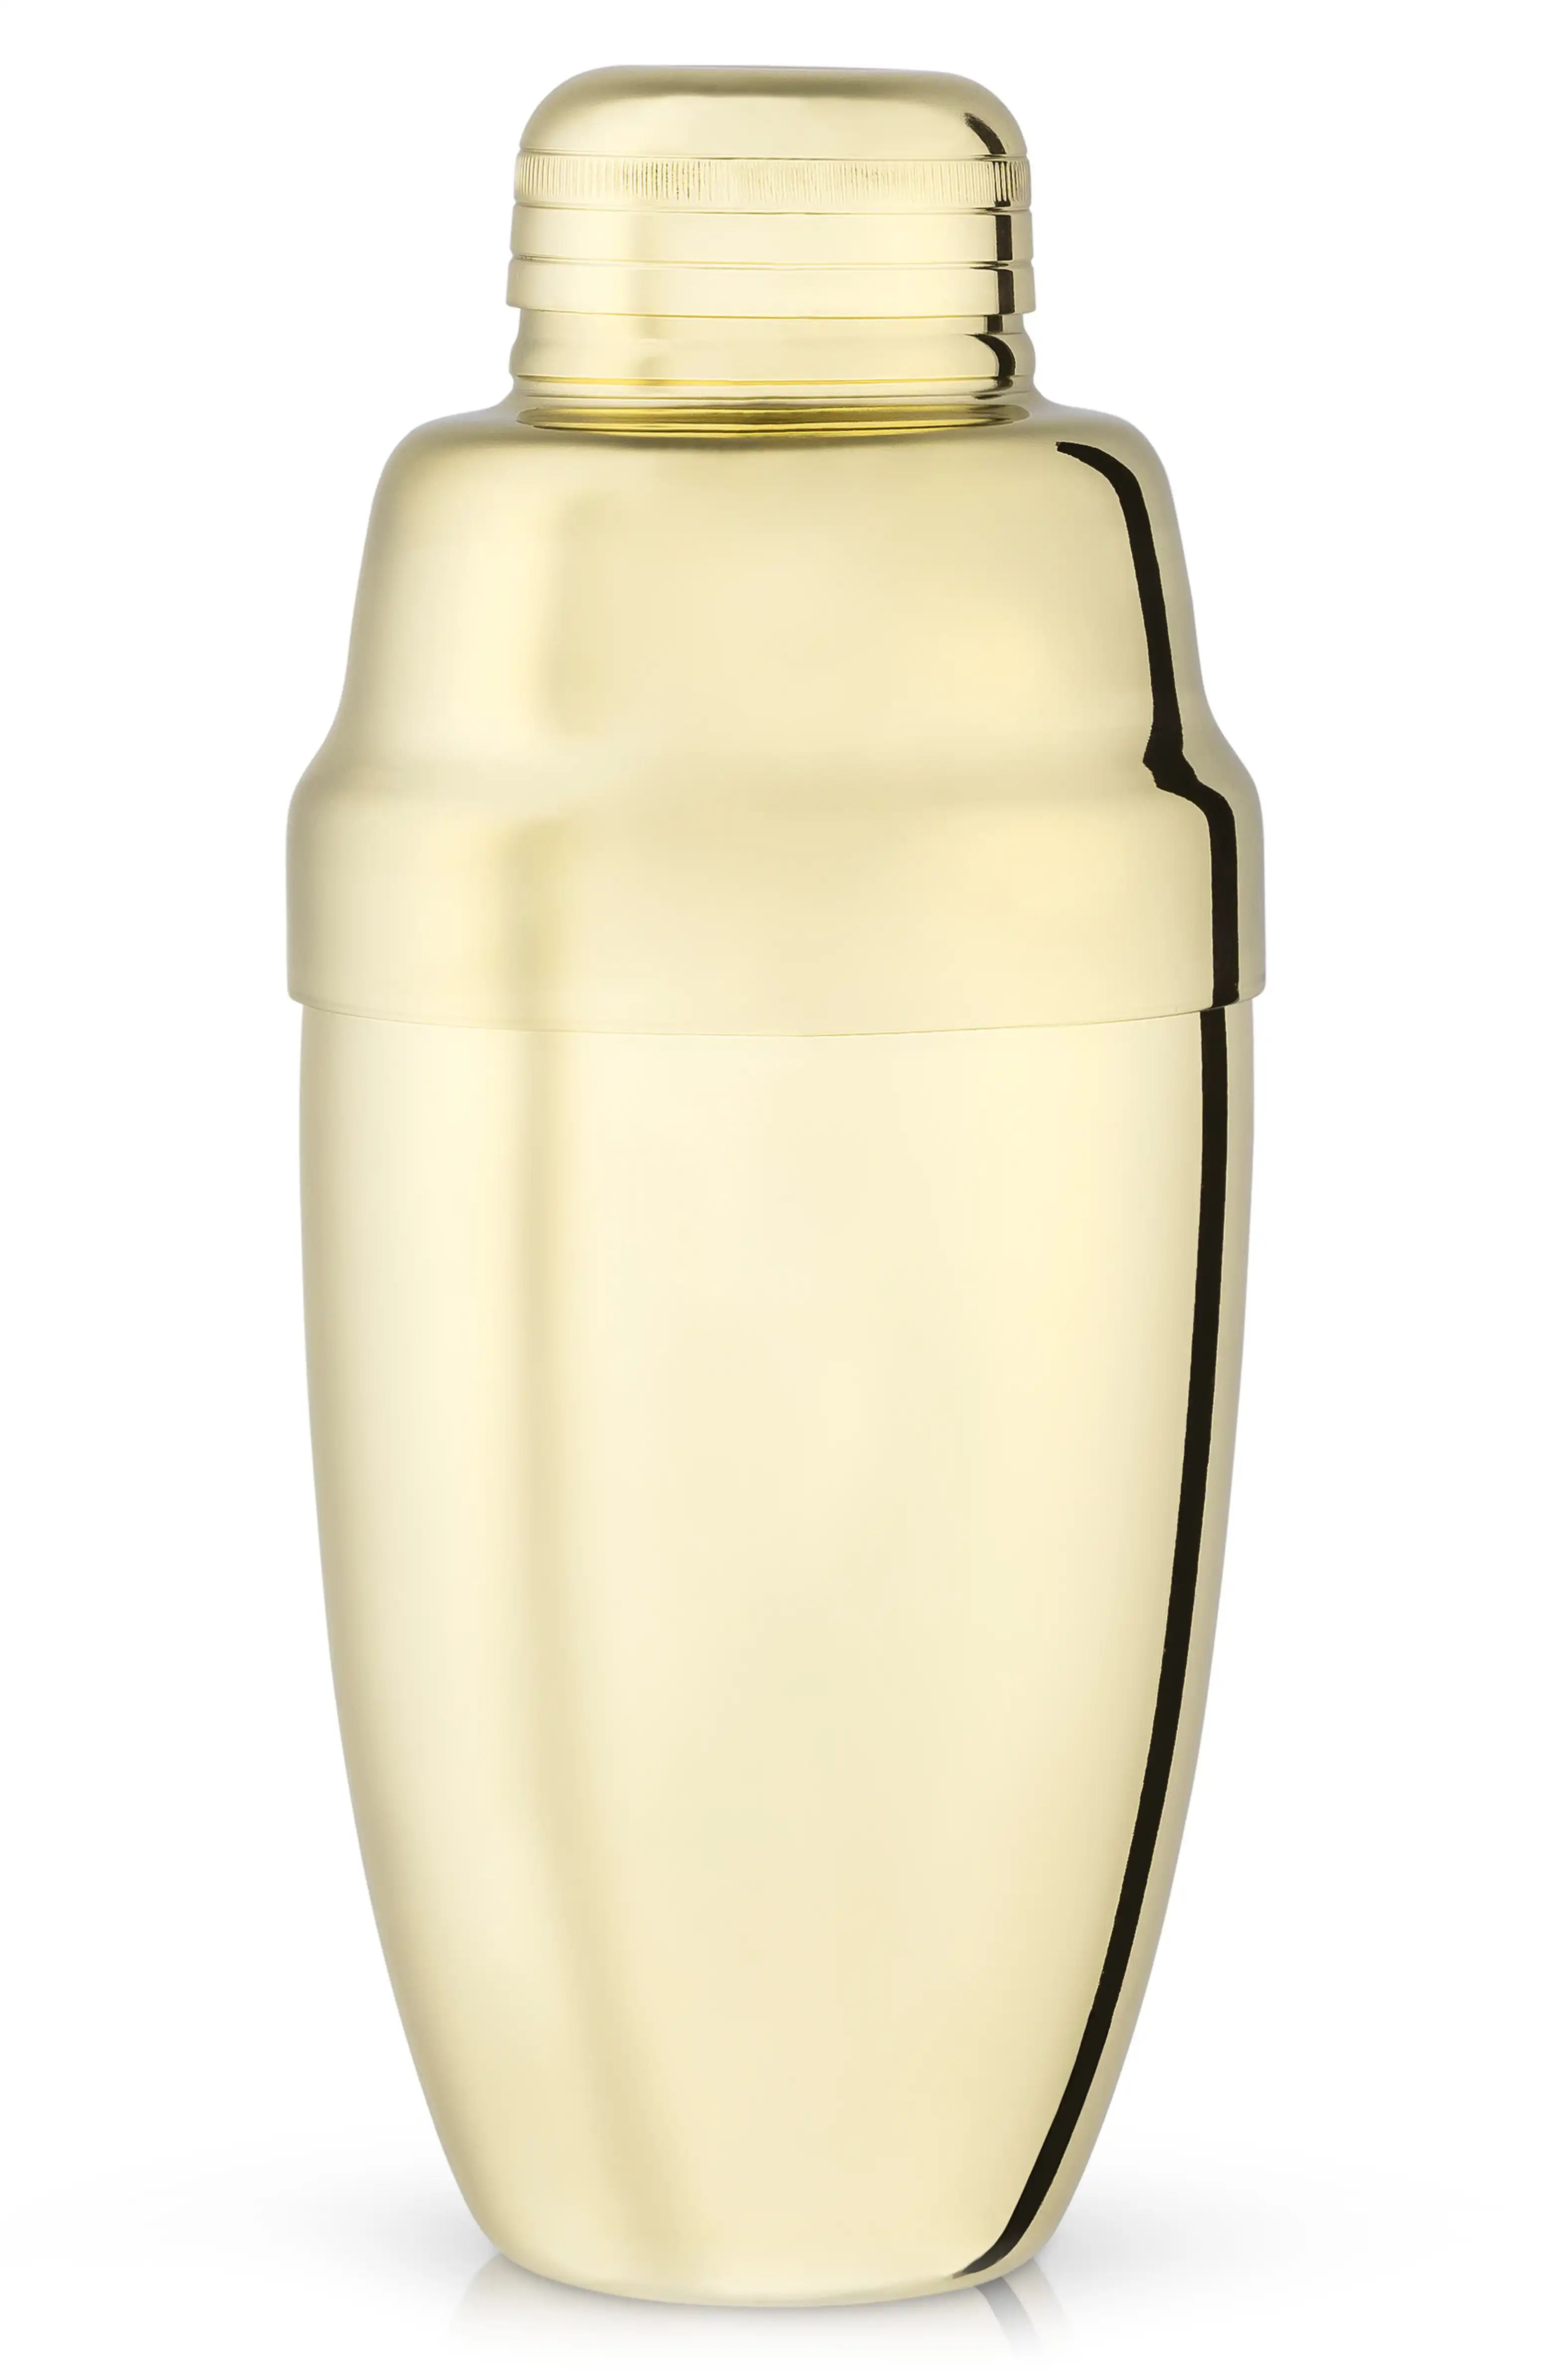 Belmont Professional Heavyweight Cocktail Shaker | Nordstrom